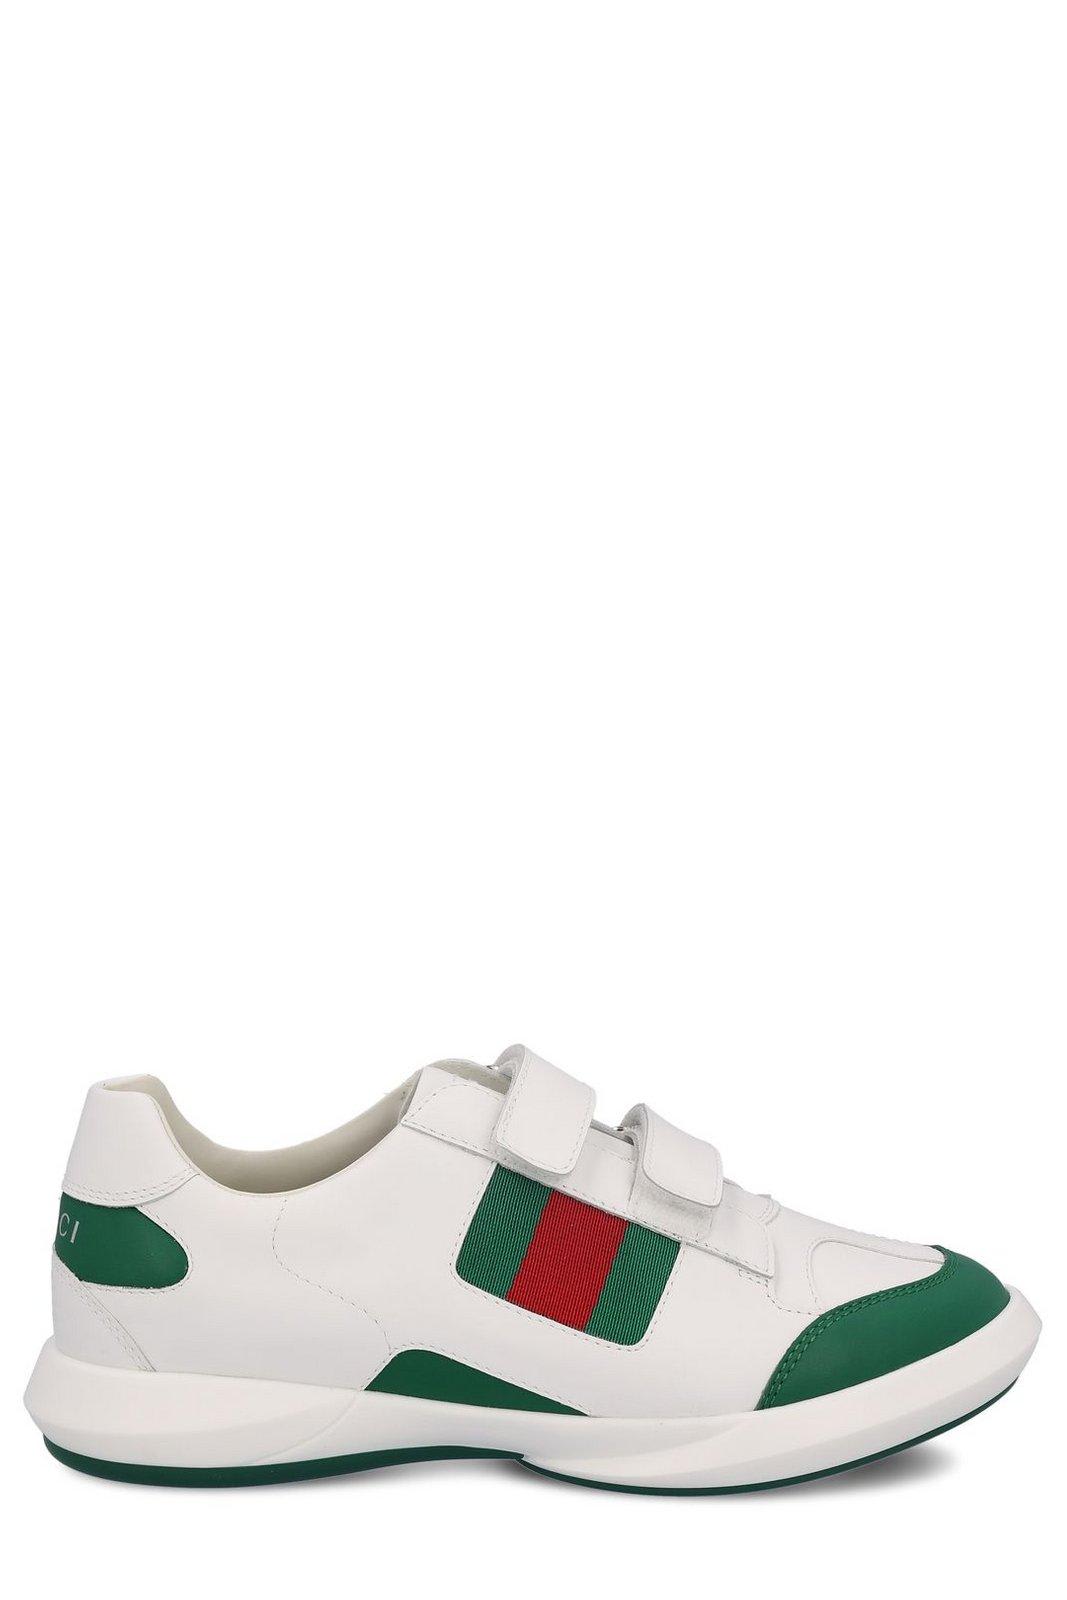 Shop Gucci Logo Printed Round Toe Sneakers